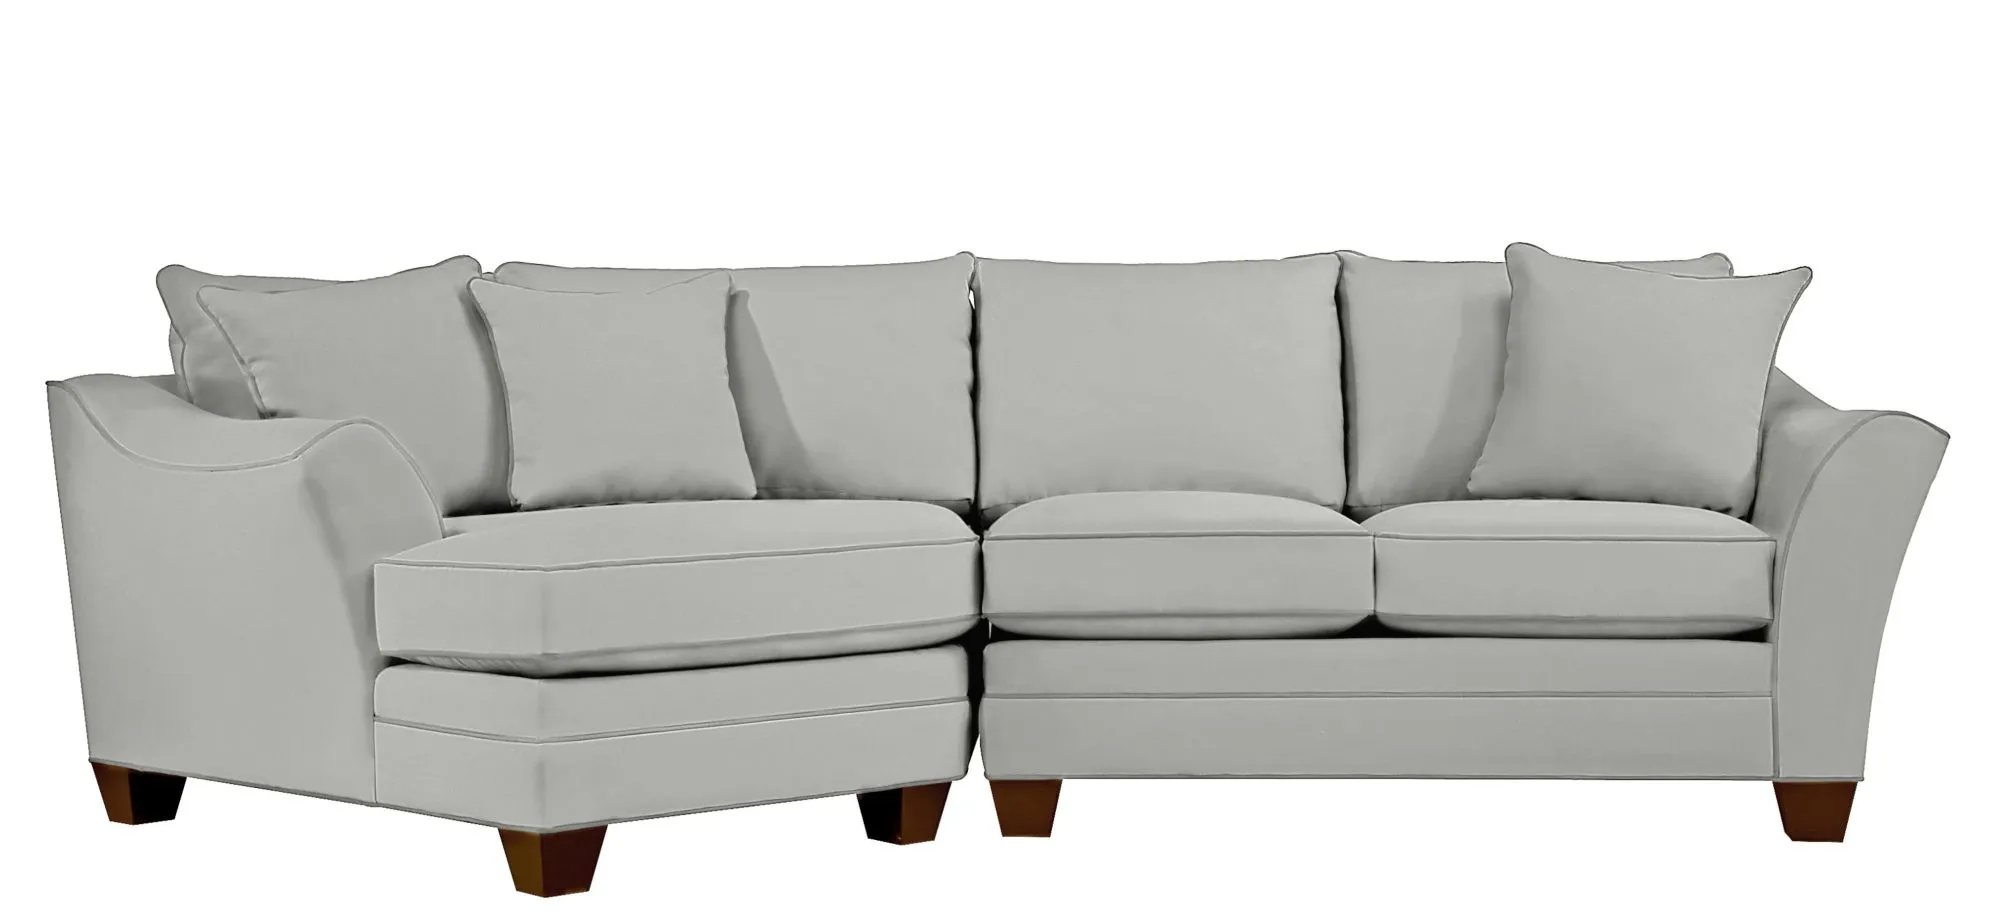 Foresthill 2-pc. Left Hand Cuddler Sectional Sofa in Suede So Soft Platinum by H.M. Richards